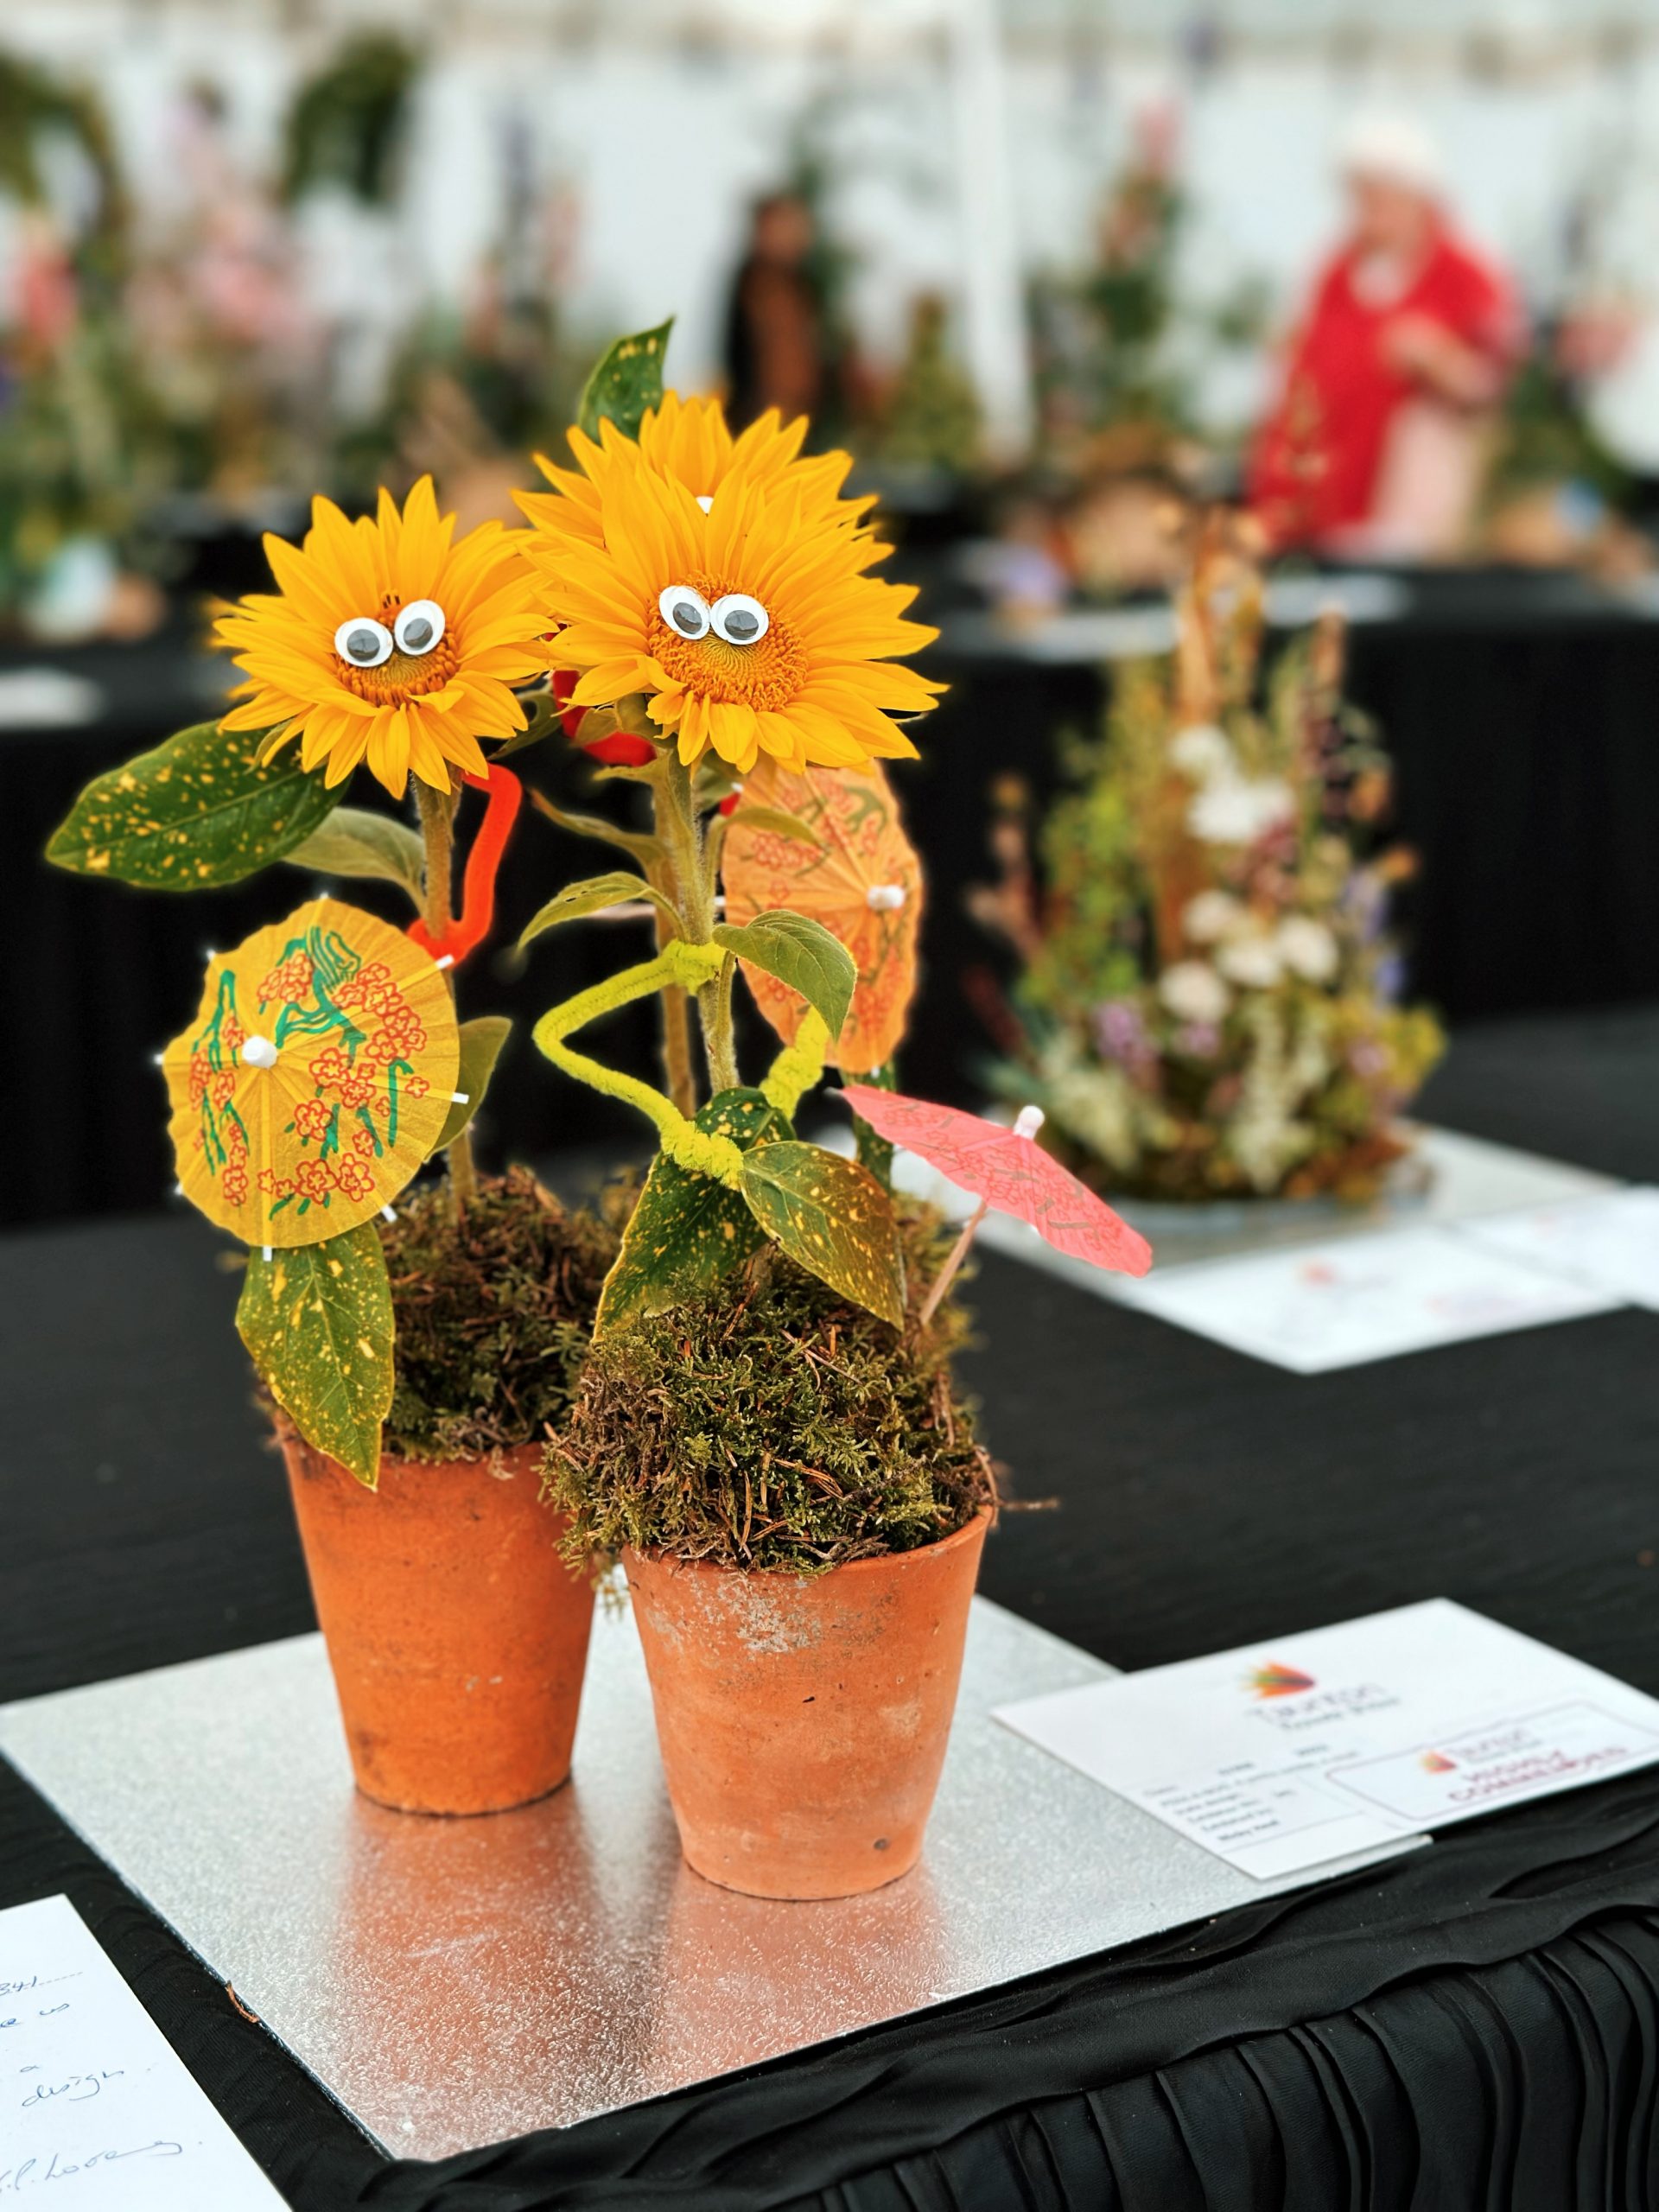 A display of sunflowers from the children section in the Competition marquee. Small sunflowers have funny googly eyes and pipe cleaner arms.